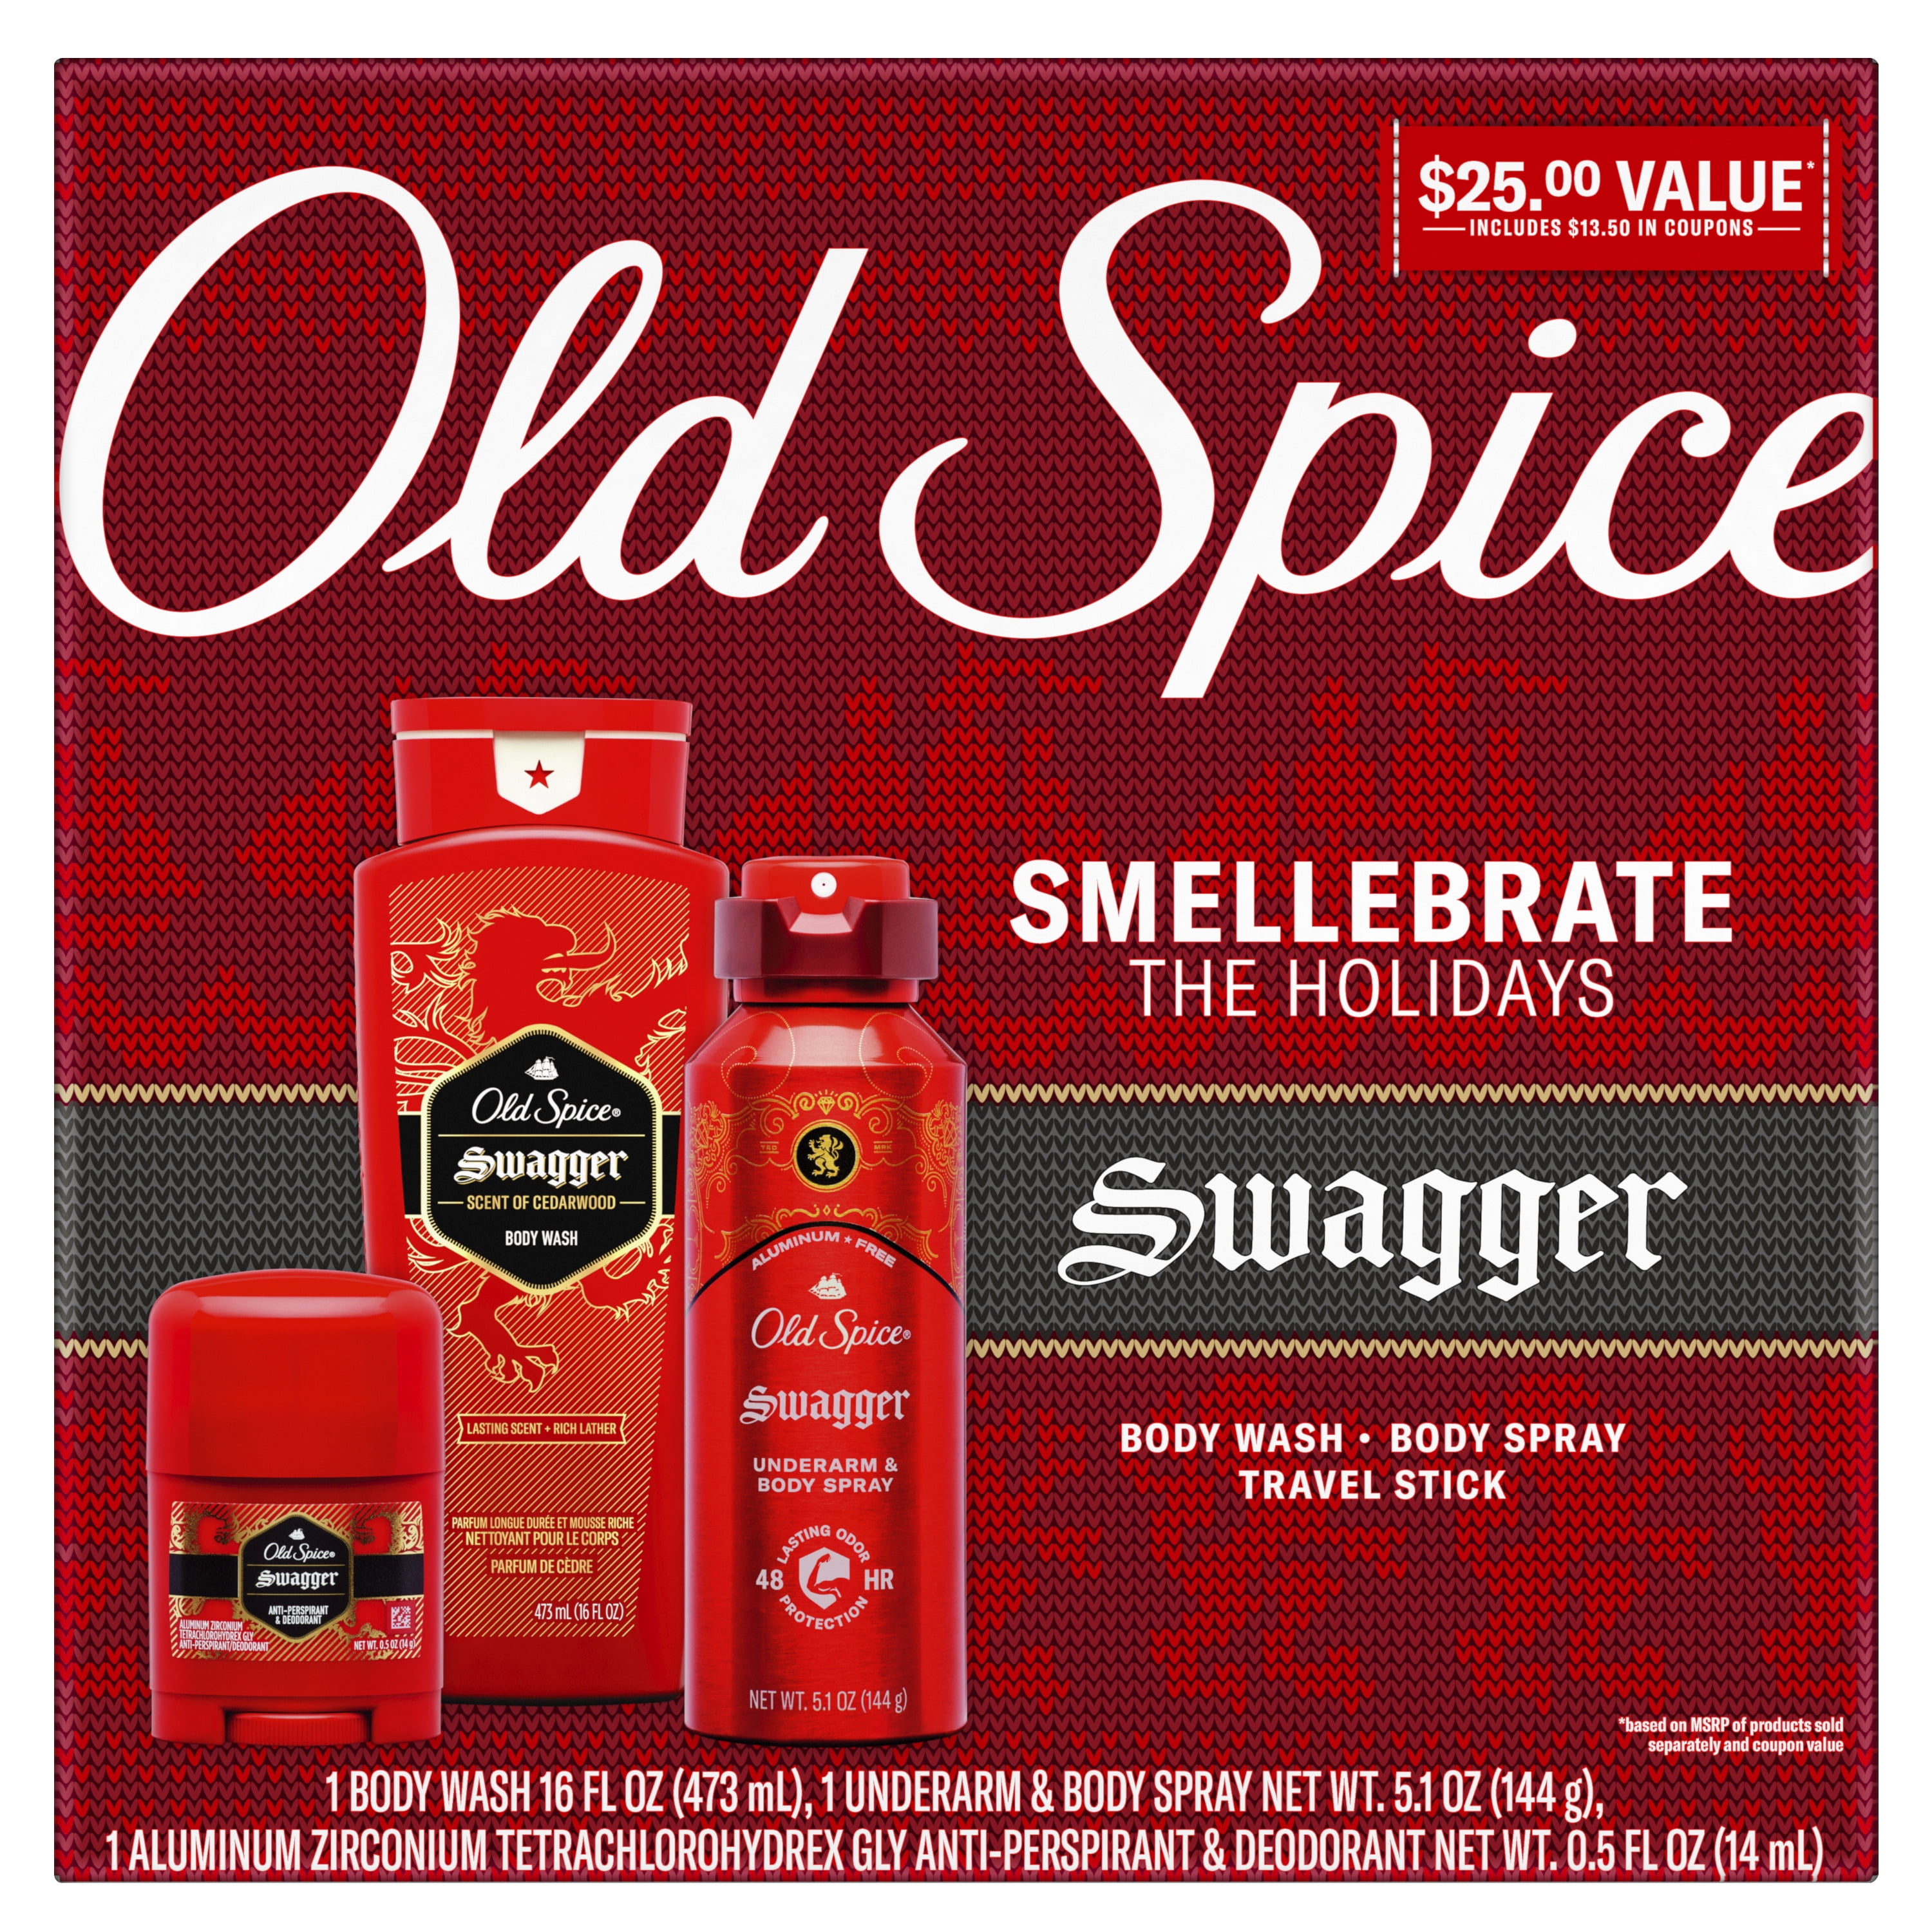 ($25 Value) Old Spice Swagger Holiday Gift Pack includes Bodywash, Body Spray, and Travel Deodorant